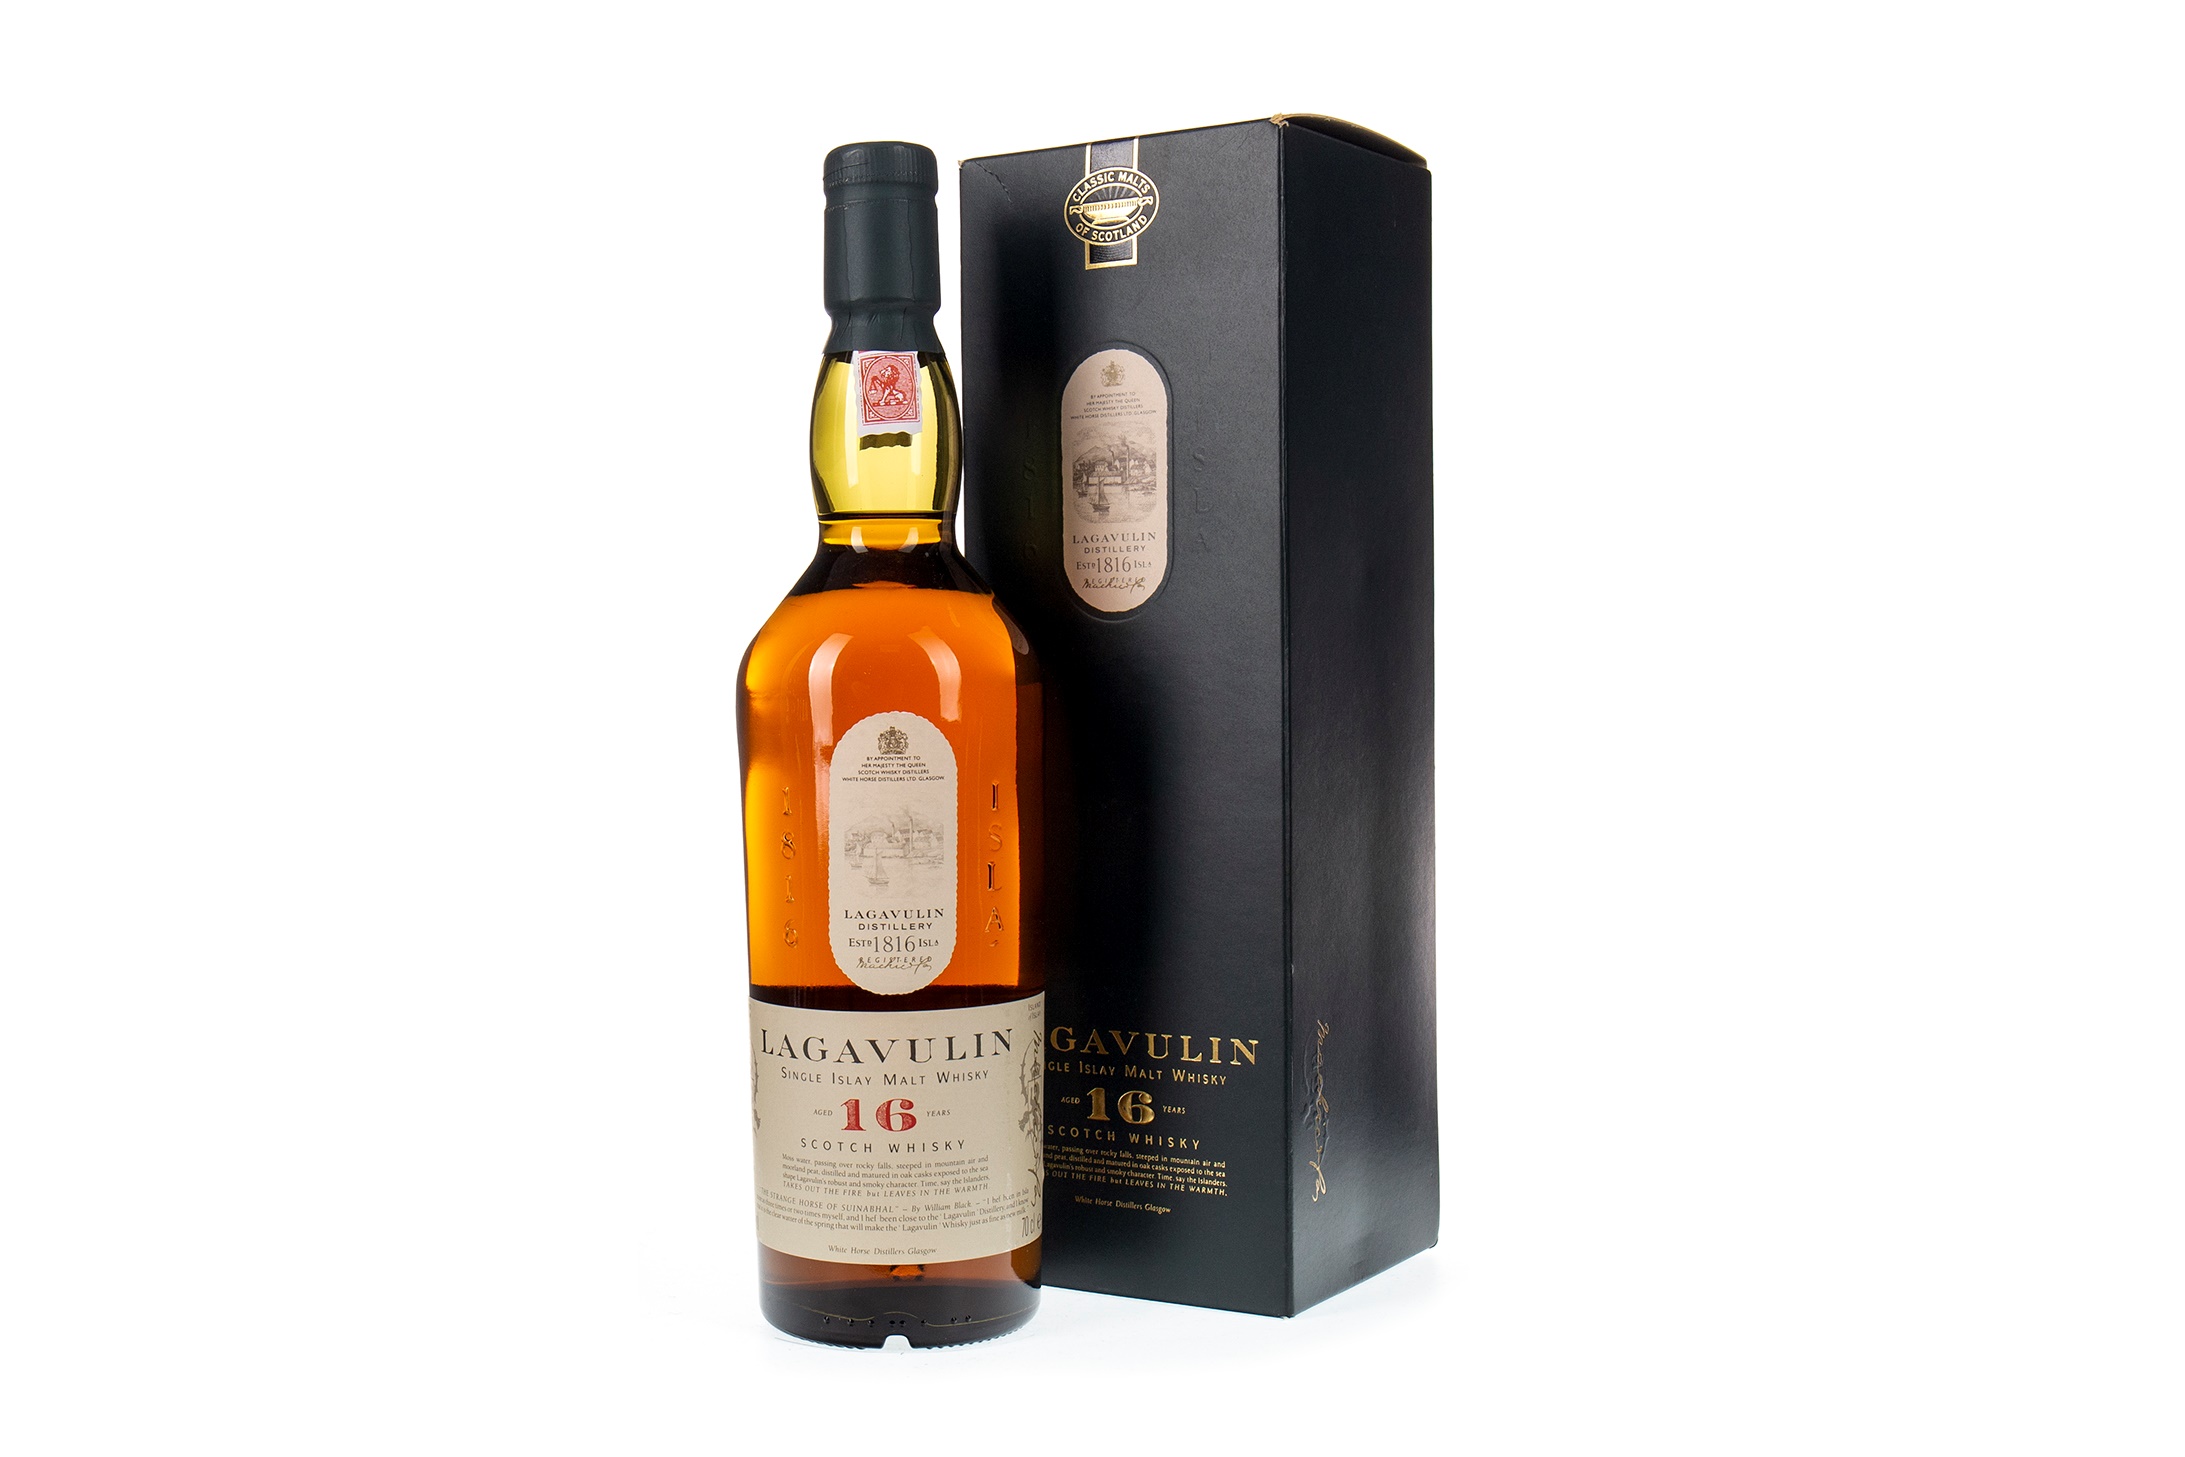 LAGAVULIN 16 YEARS OLD WHITE HORSE DISTILLERS - Image 2 of 3